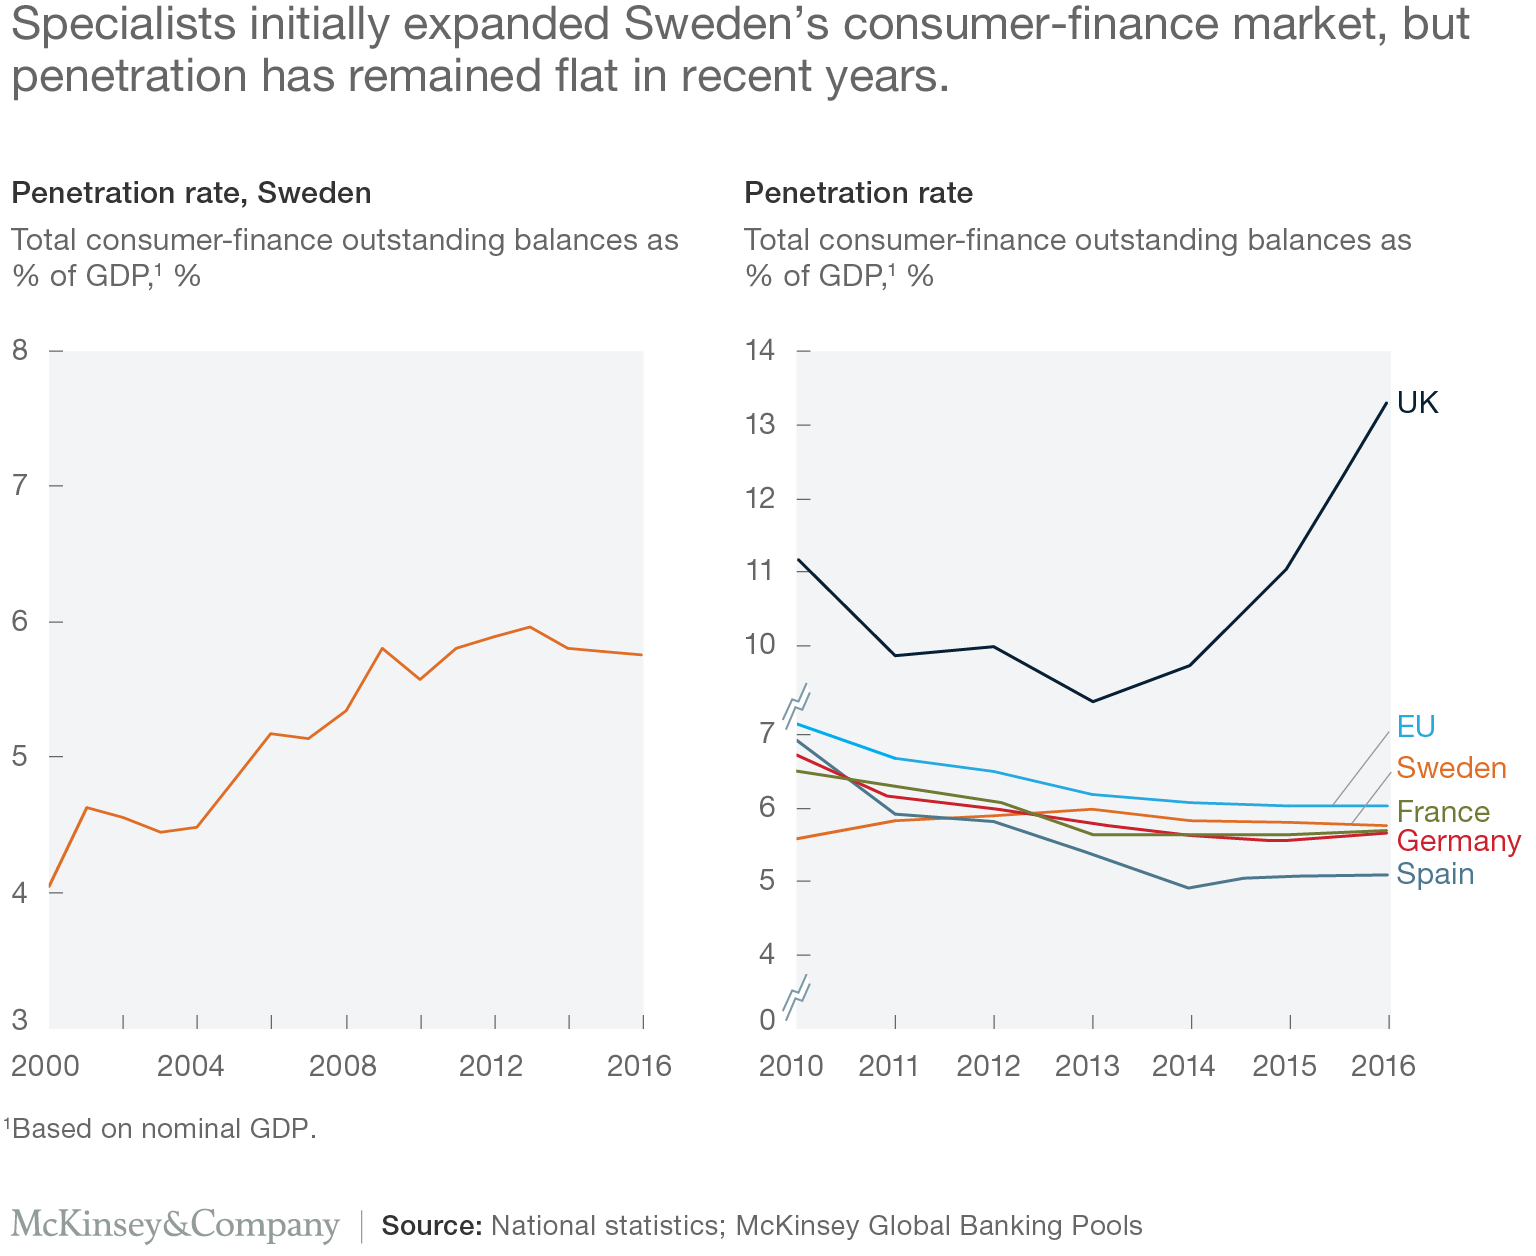 Specialists initially expanded Sweden’s consumer-finance market, but penetration has remained flat in recent years.